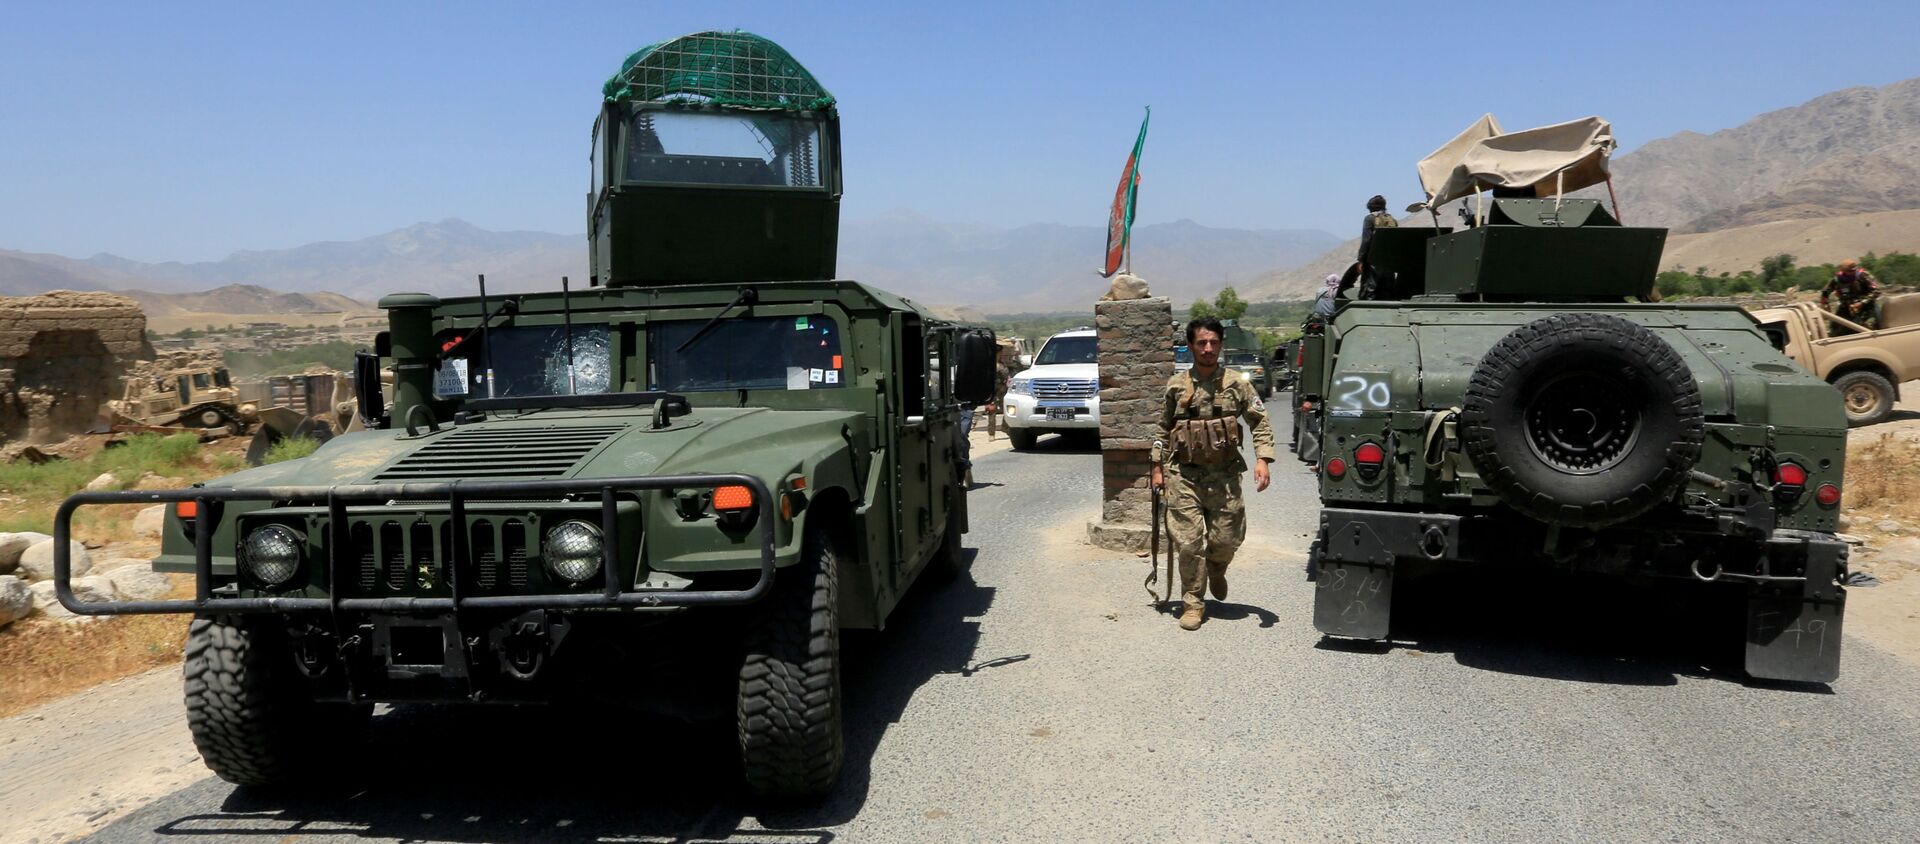 Afghan National Army (ANA) soldiers patrol the area near a checkpoint recaptured from the Taliban, in the Alishing district of Laghman province, Afghanistan, 8 July 2021 - Sputnik International, 1920, 17.07.2021